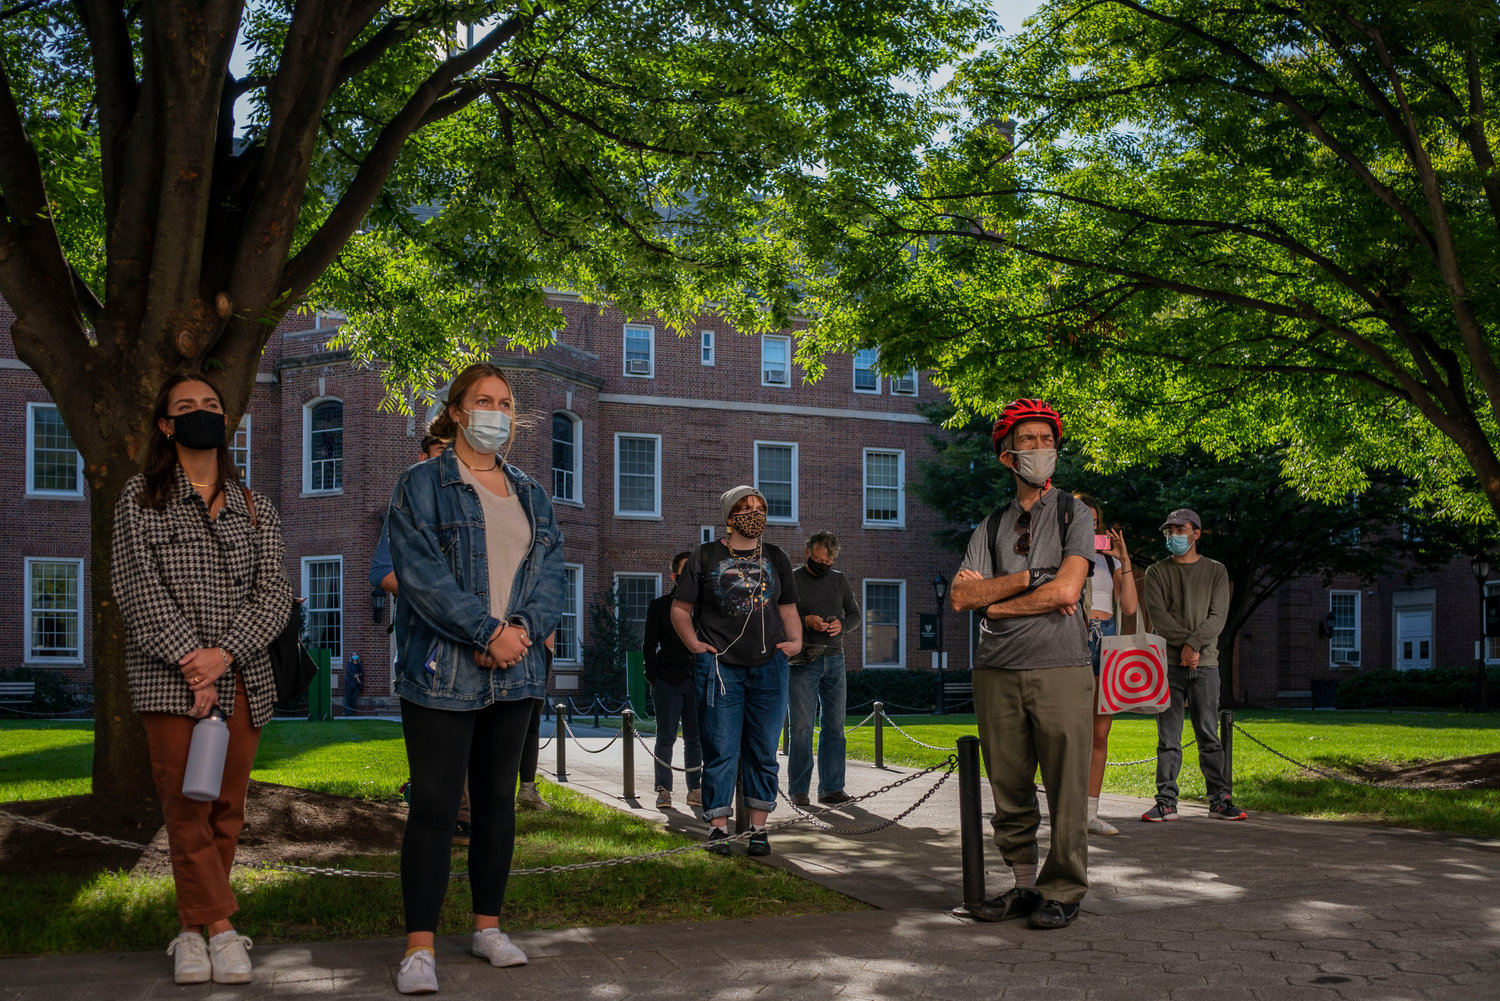 Although they also had the option to attend remotely, a small but steady crowd gathered at Manhattan College’s Smith Auditorium for a ‘shoe strike,’ a protest calling for action on climate change.